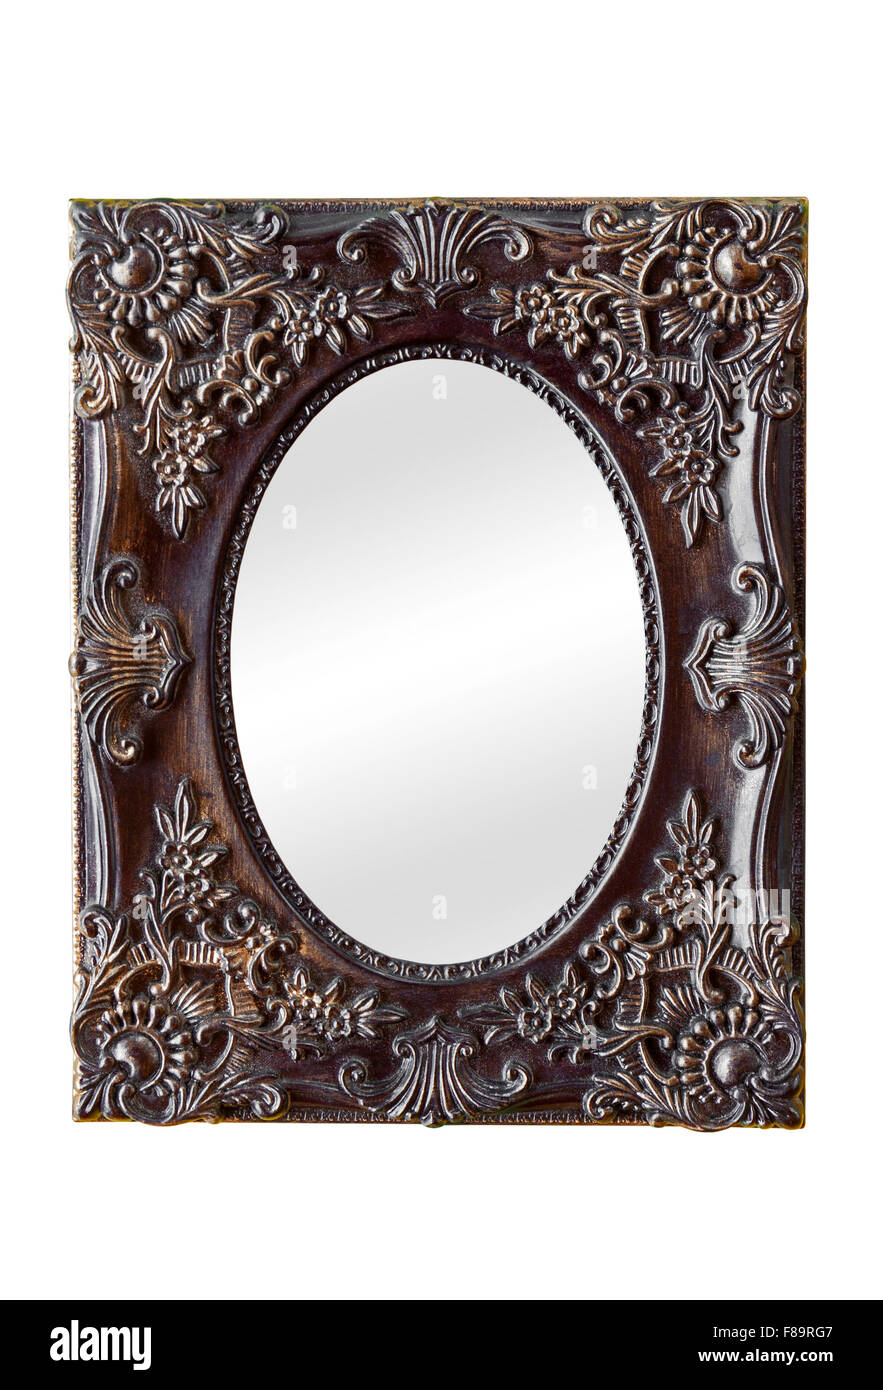 Old classic style mirror with vintage decorated frame isolated on white background Stock Photo